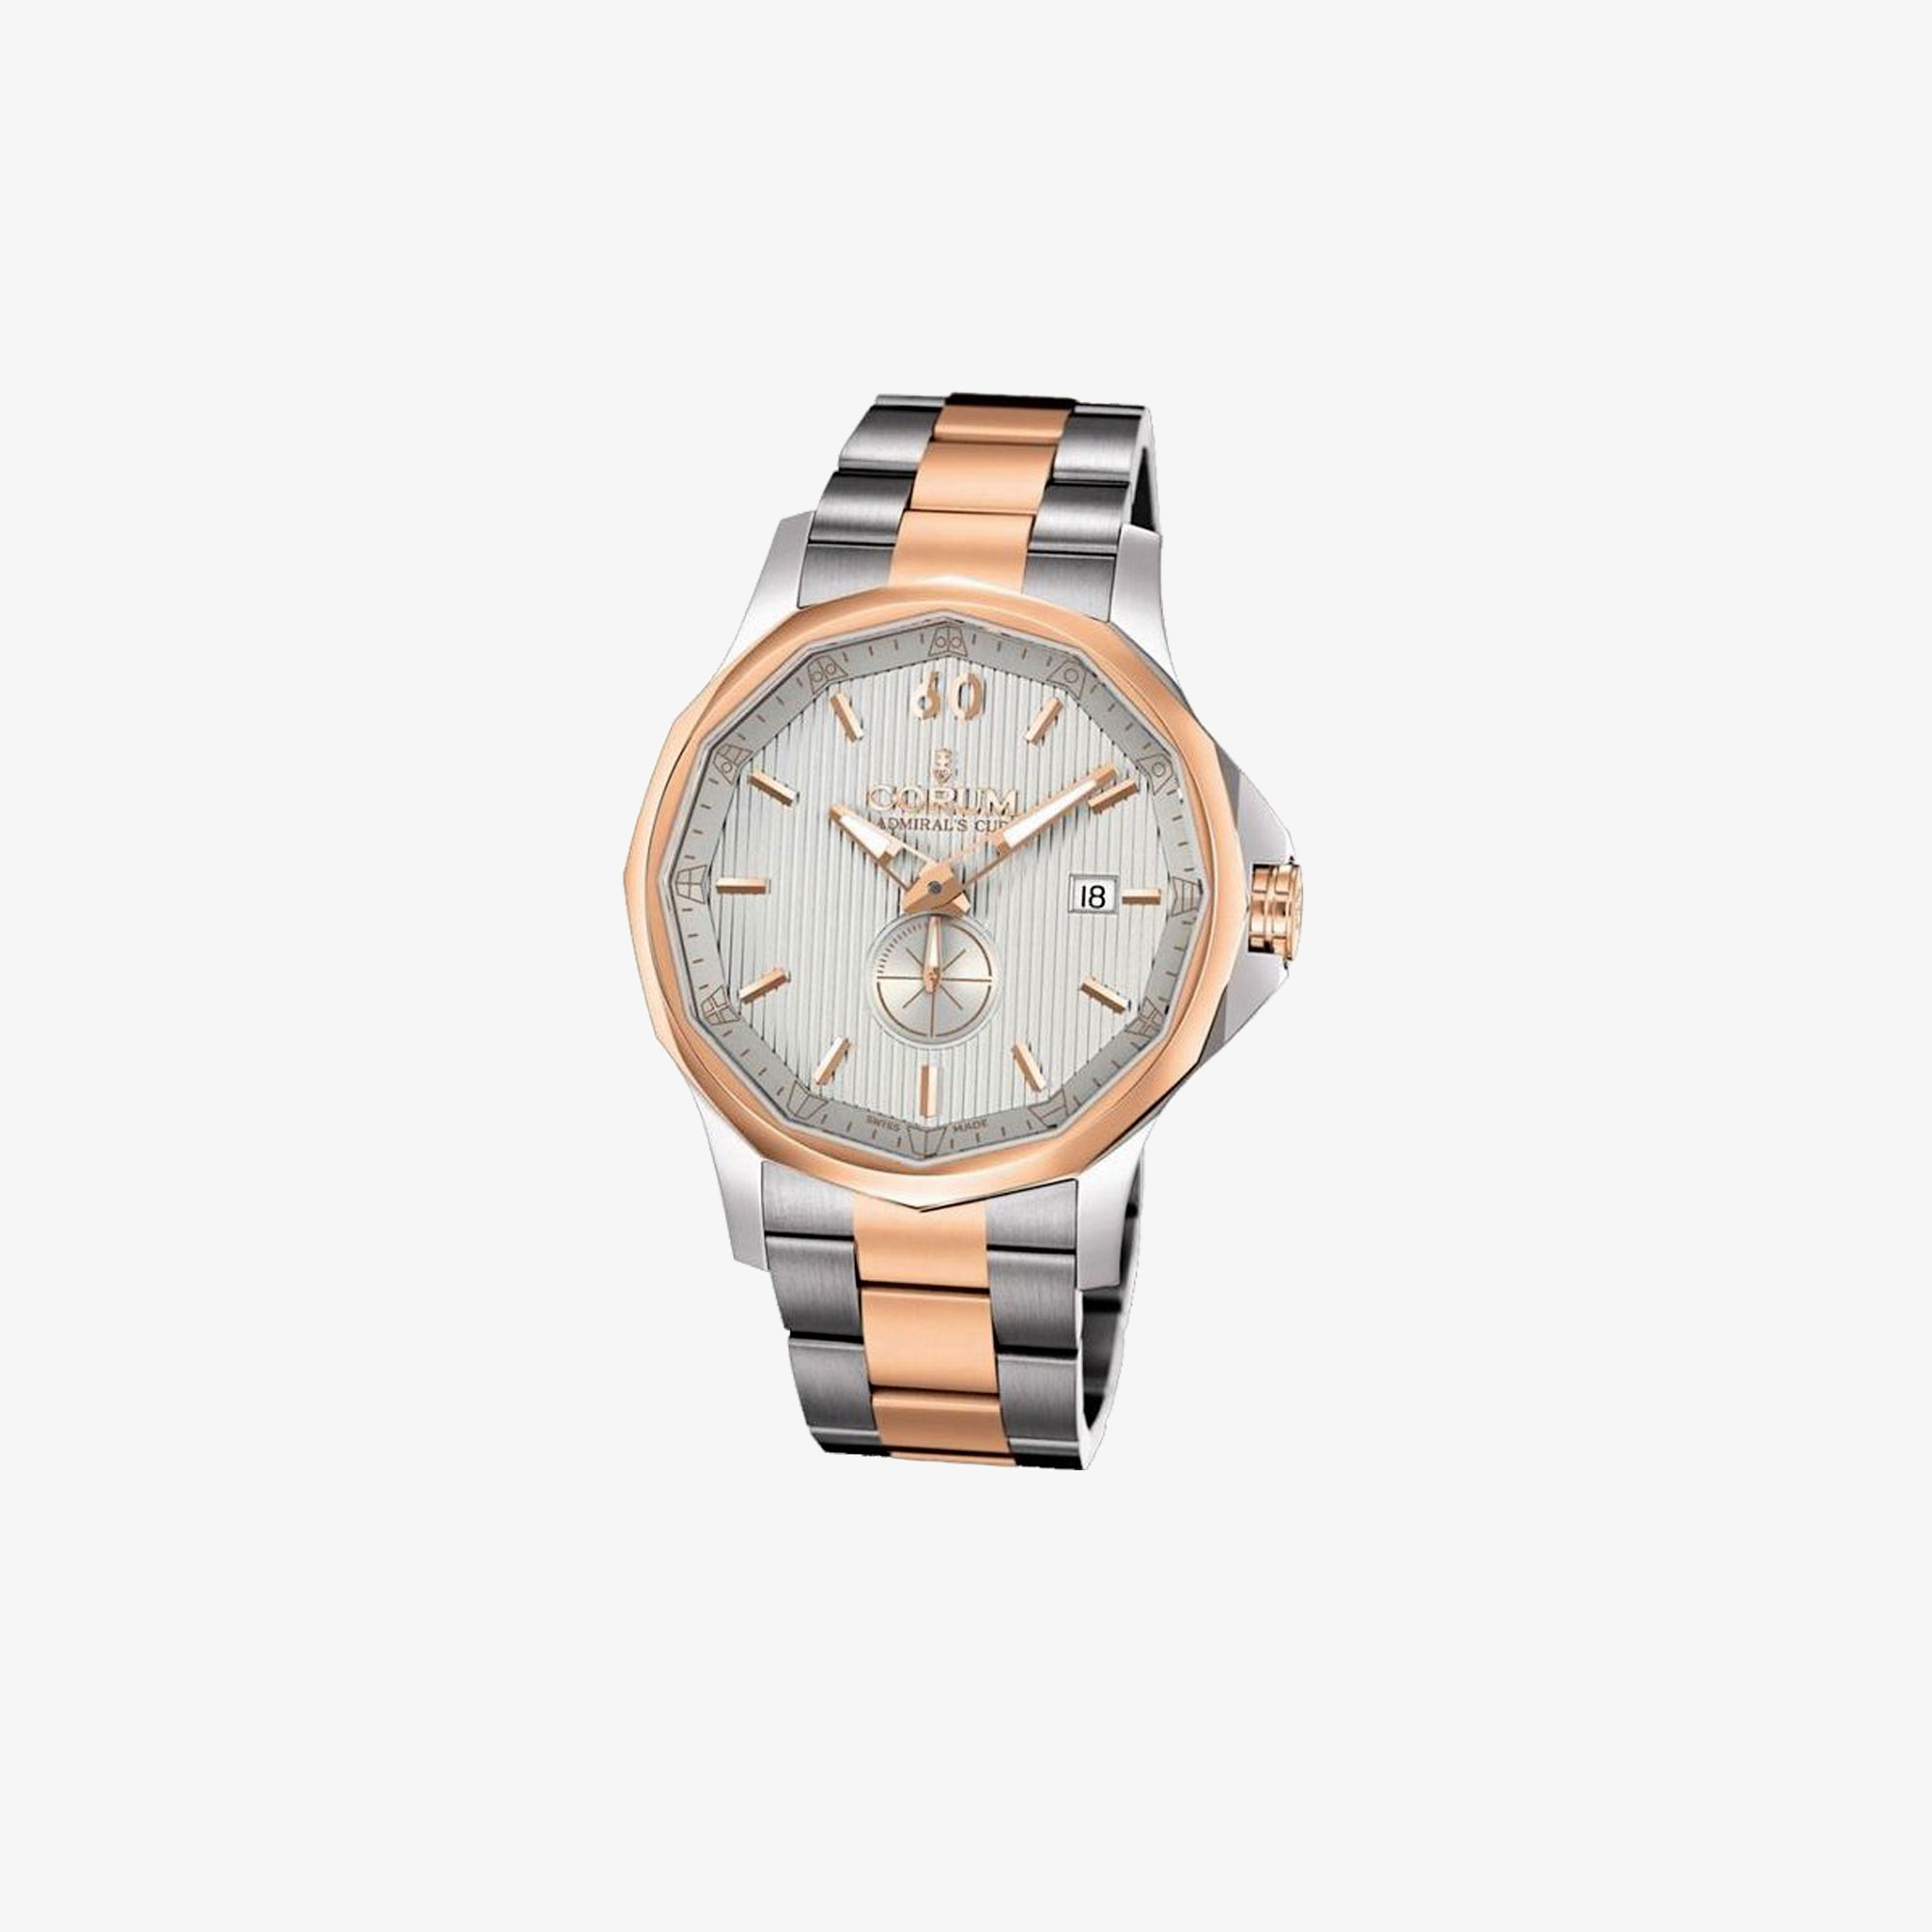 CORUM ADMIRAL'S CUP LEGENT 42MM TWO-TONE WATCH